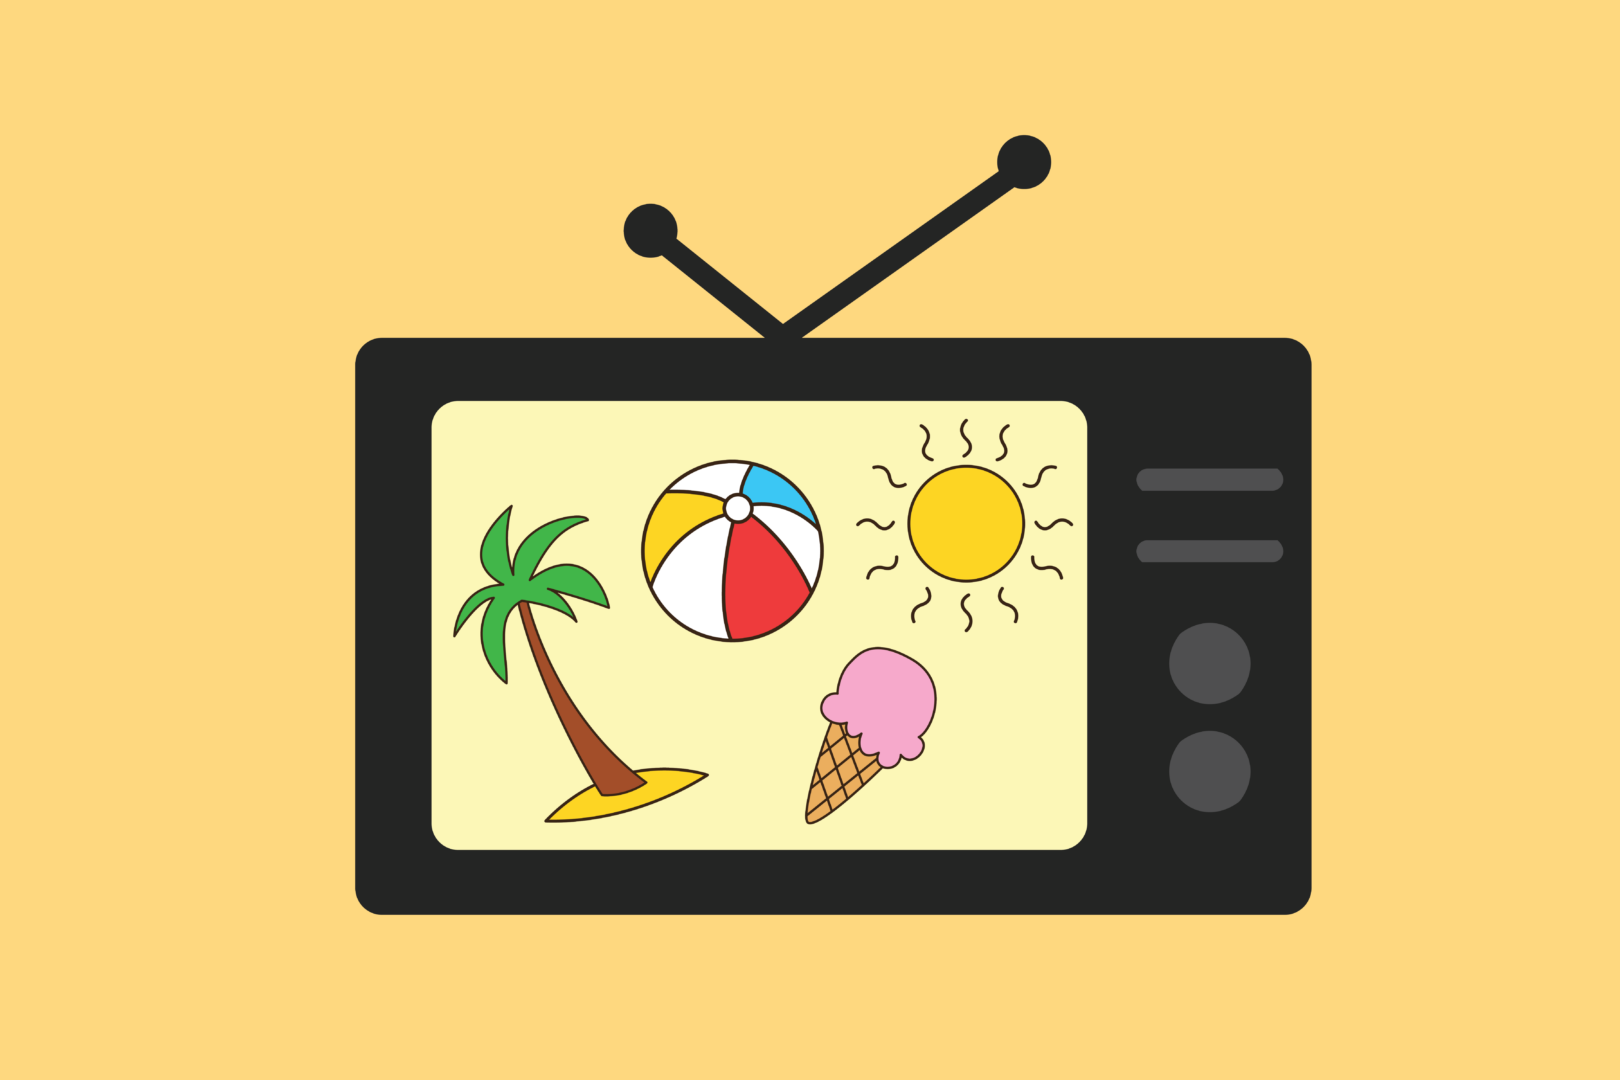 A graphic of a palm tree, beach ball, ice cream cone and sun inside a retro TV, on a yellow background.